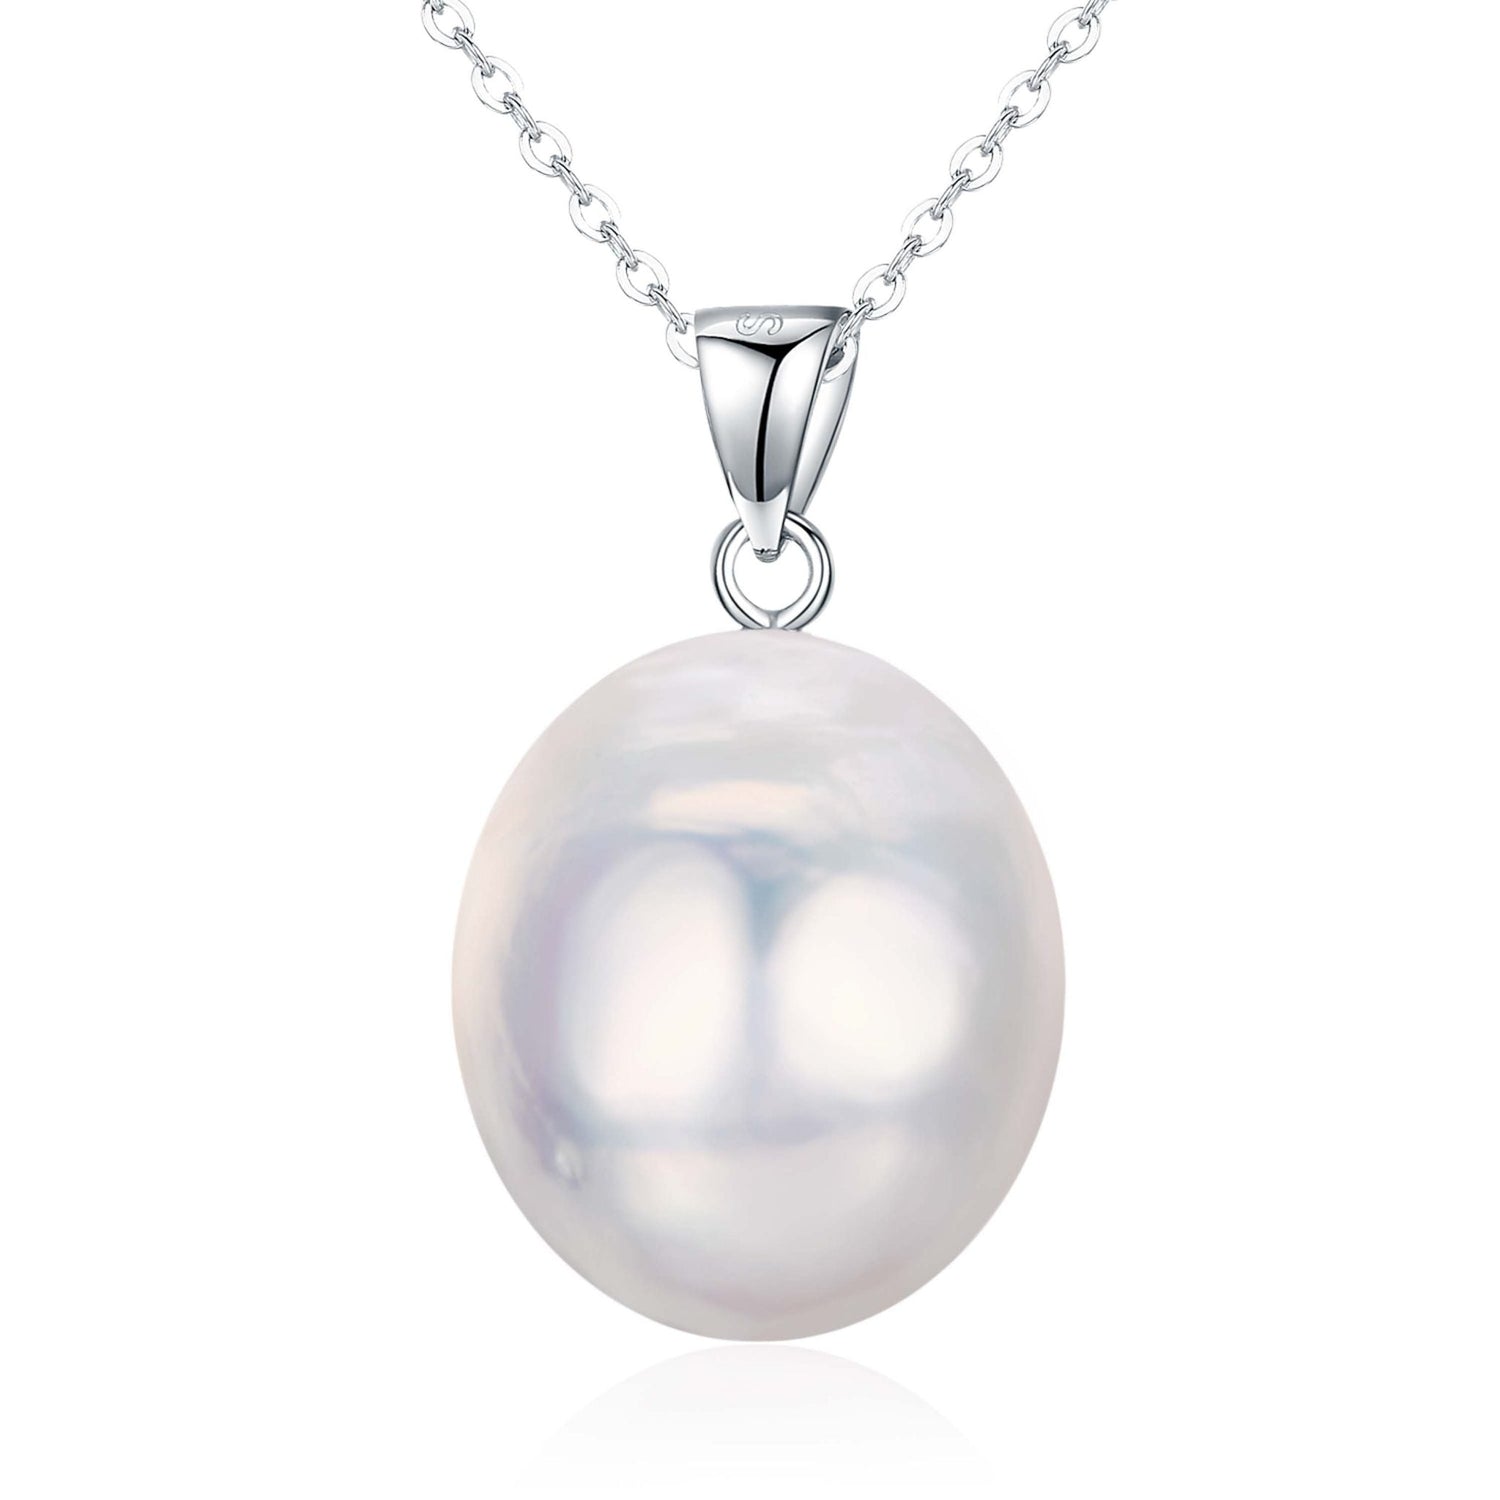 SILVER GIANT WHITE BAROQUE PEARL NECKLACE - Timeless Pearl